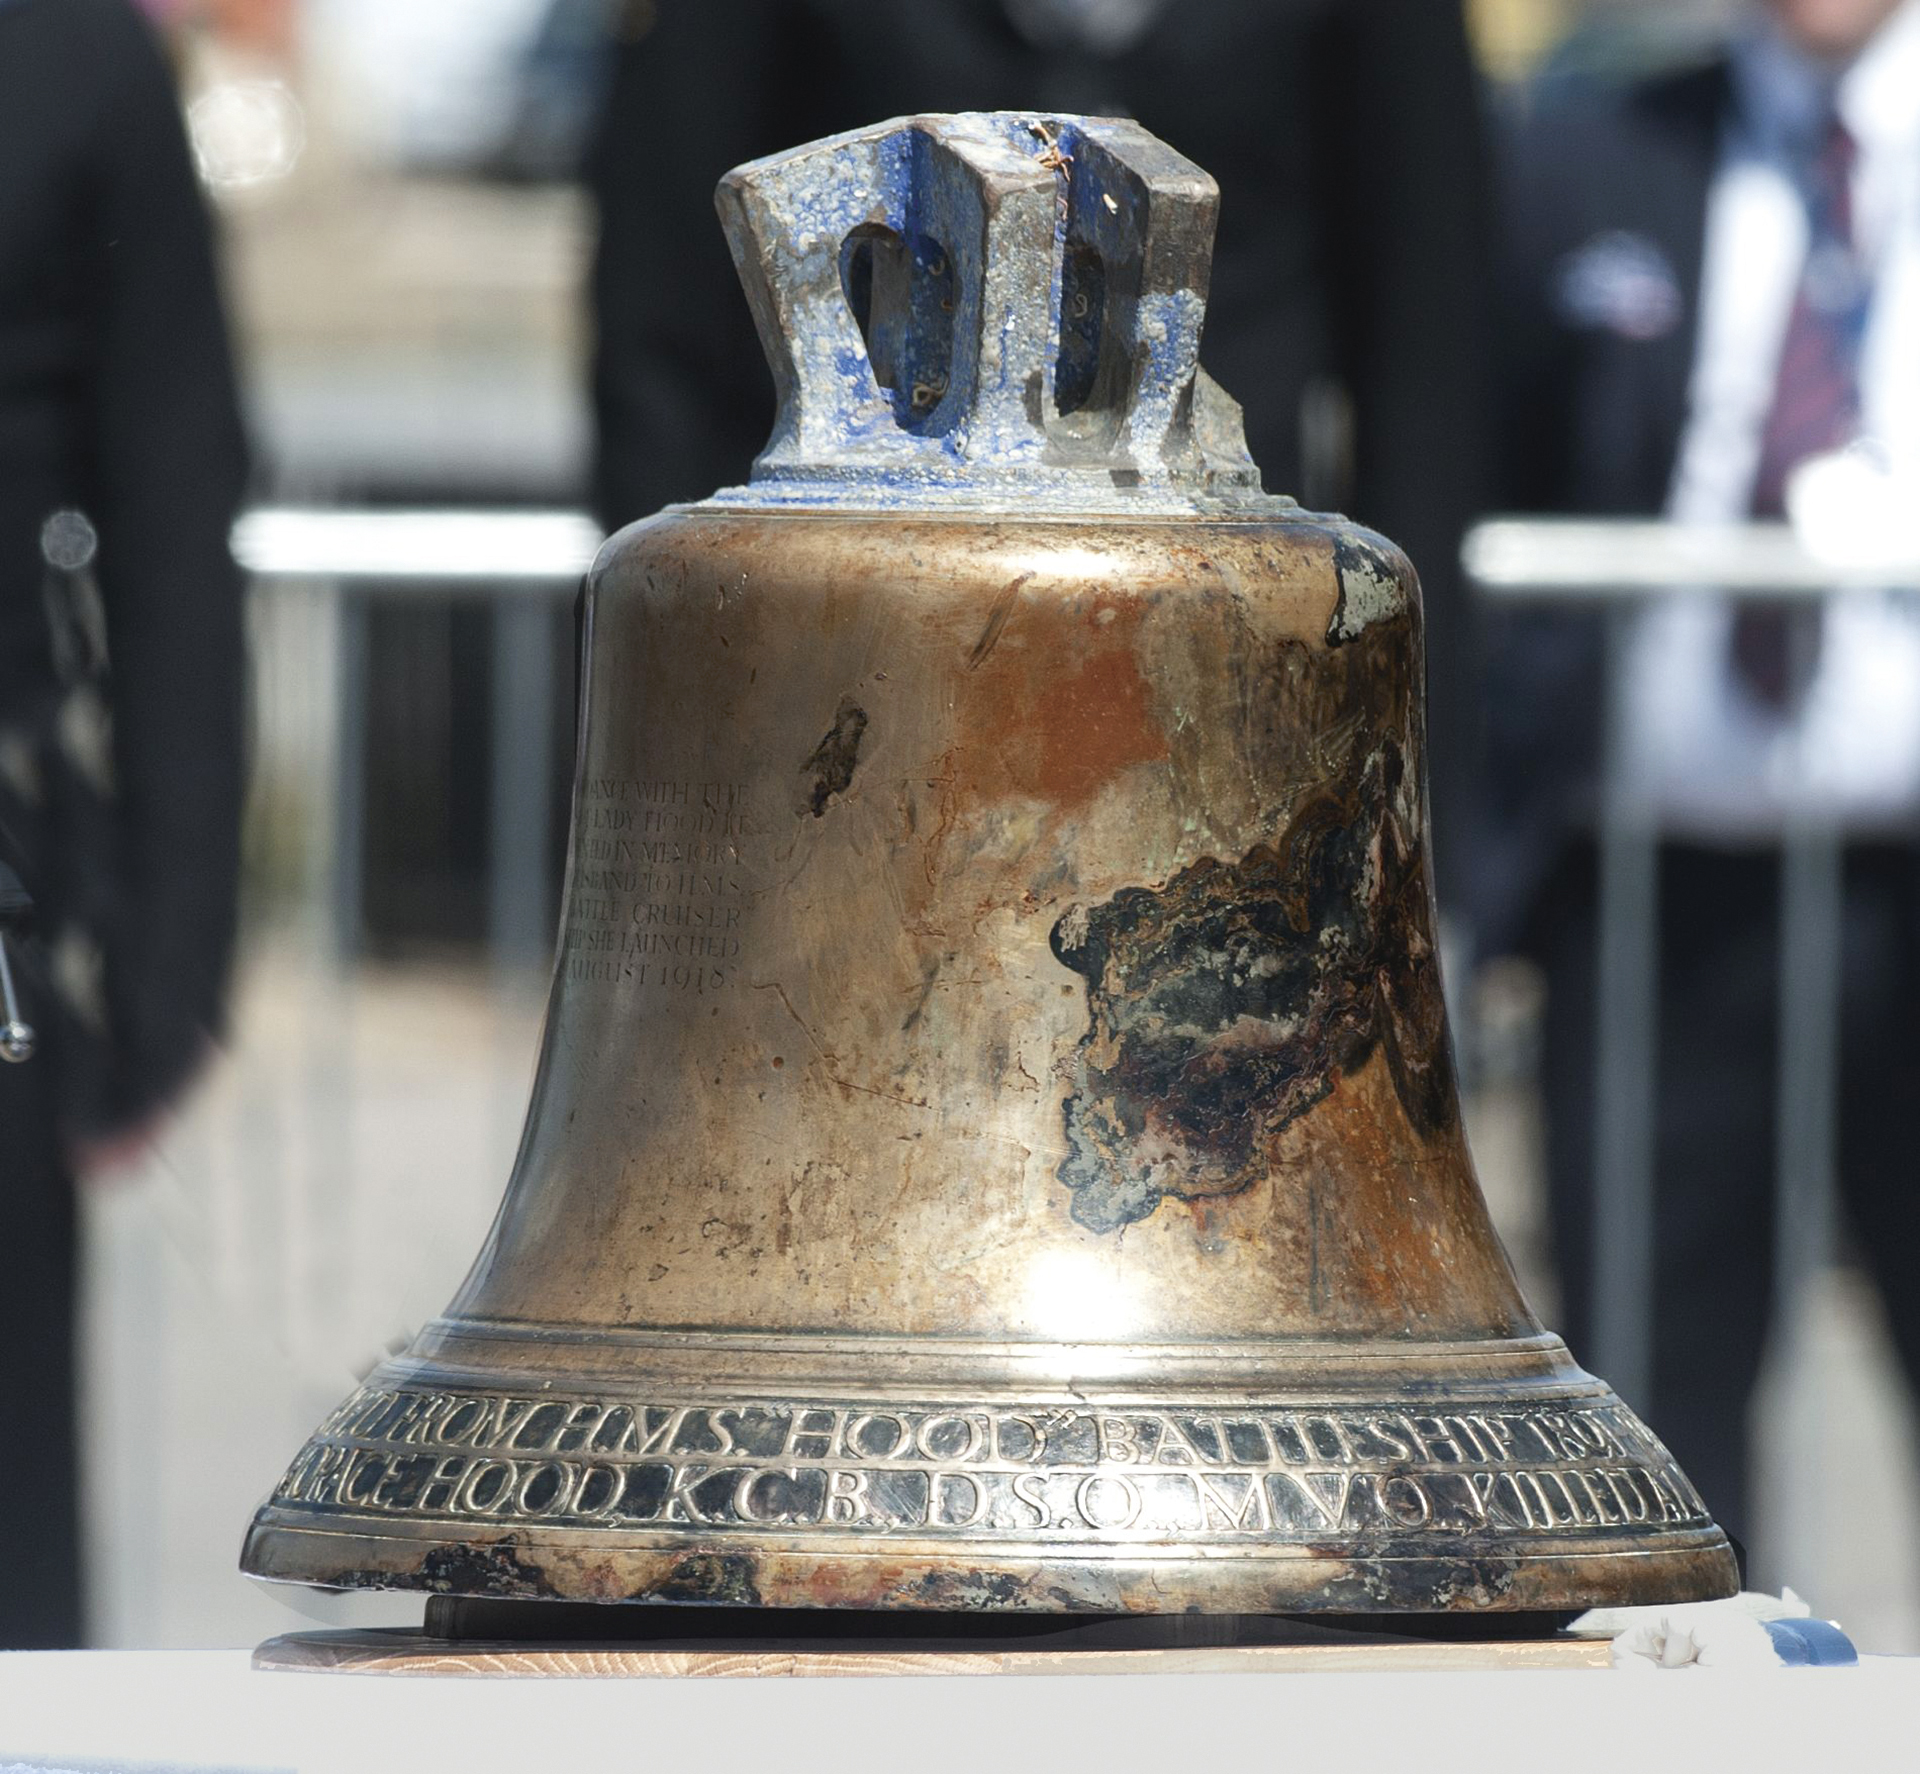 HMS Hood recovered bell